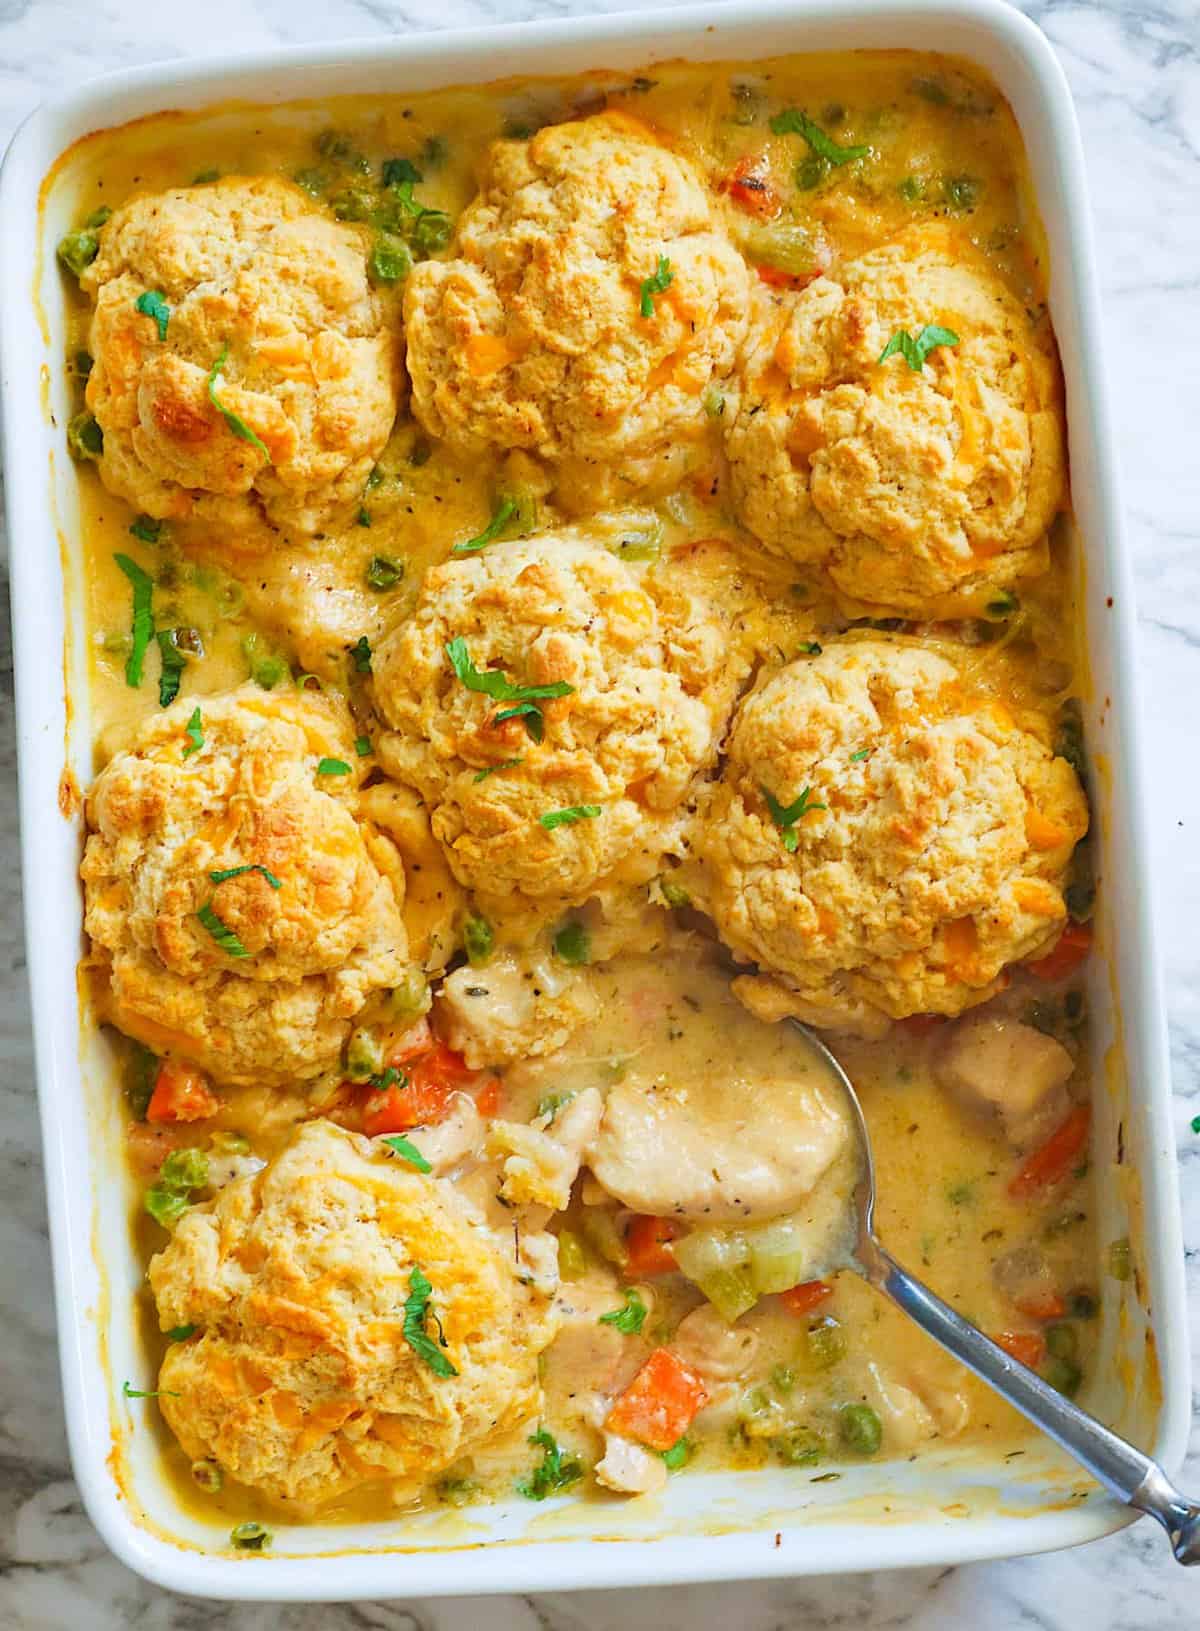 Serving up Creamy Chicken and Biscuits fresh from the oven for pure comfort food